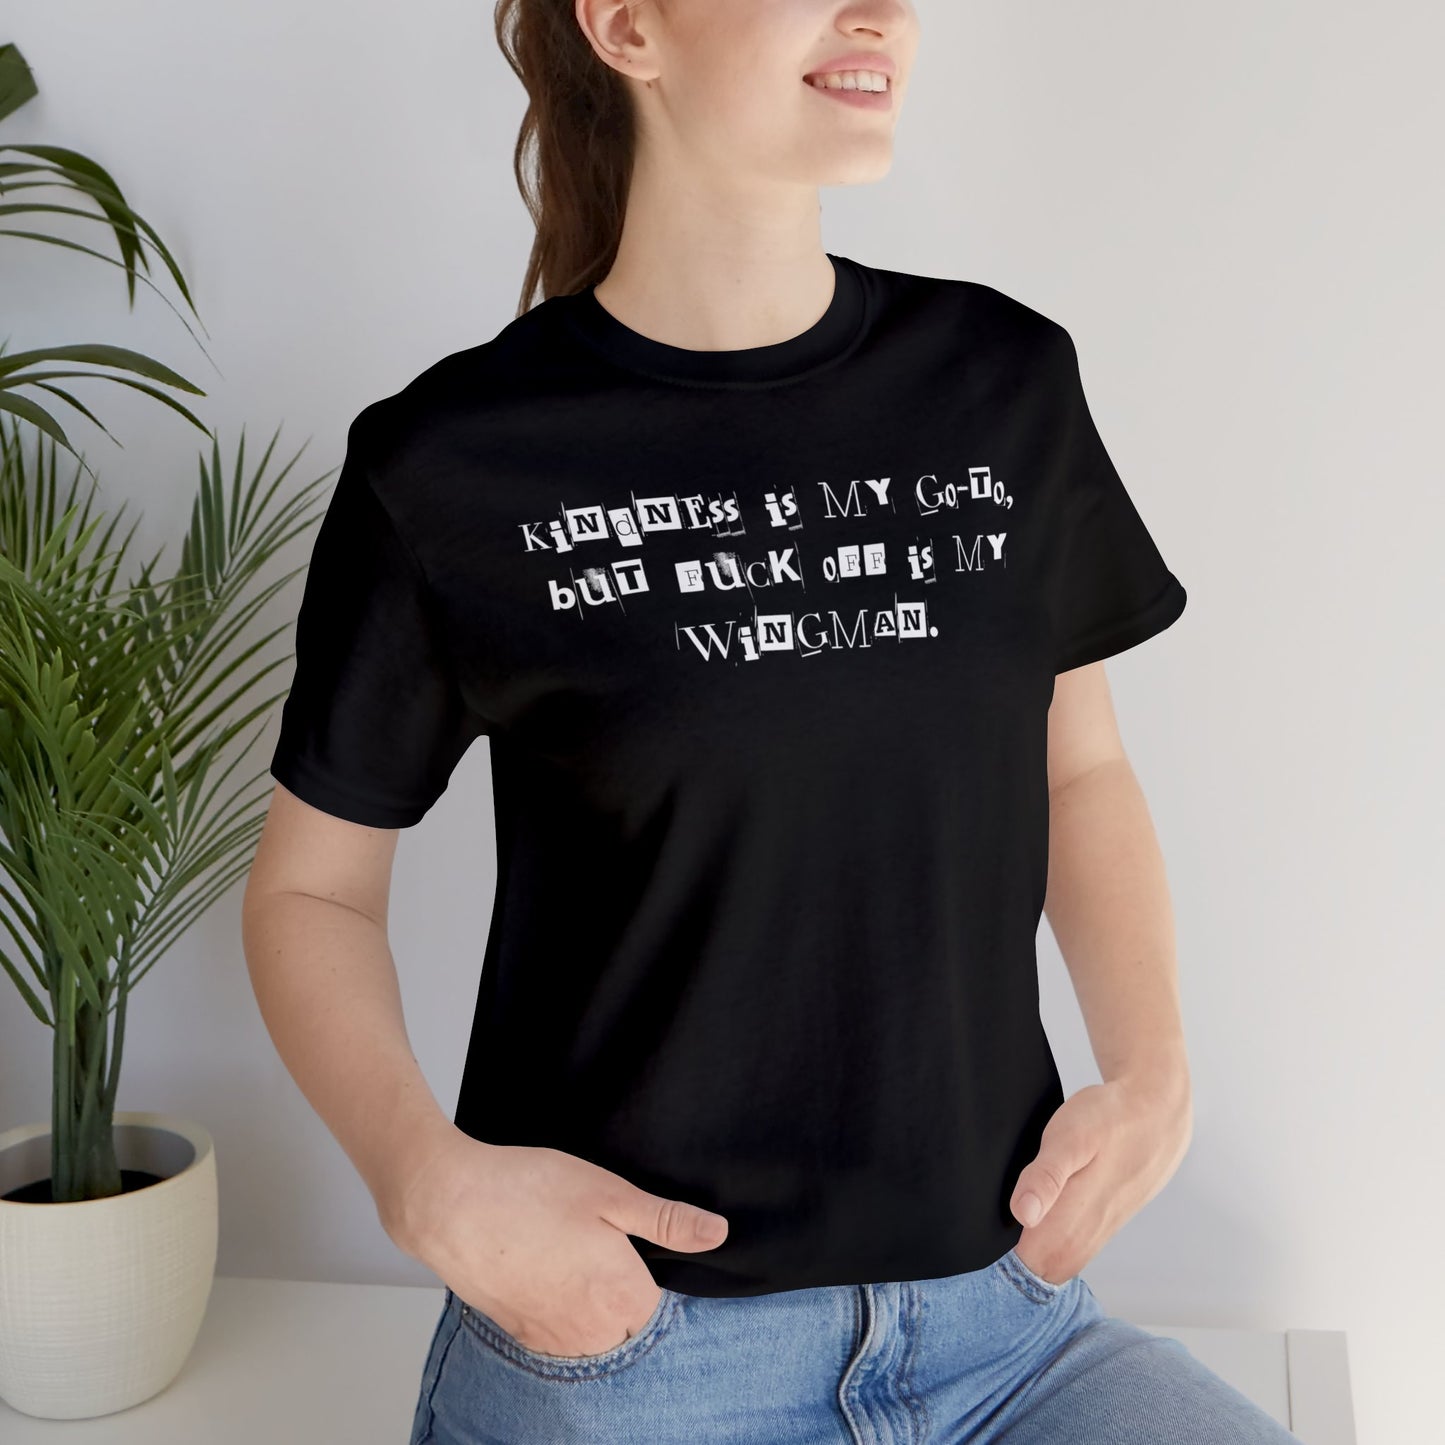 Kindness My Go-To Tee